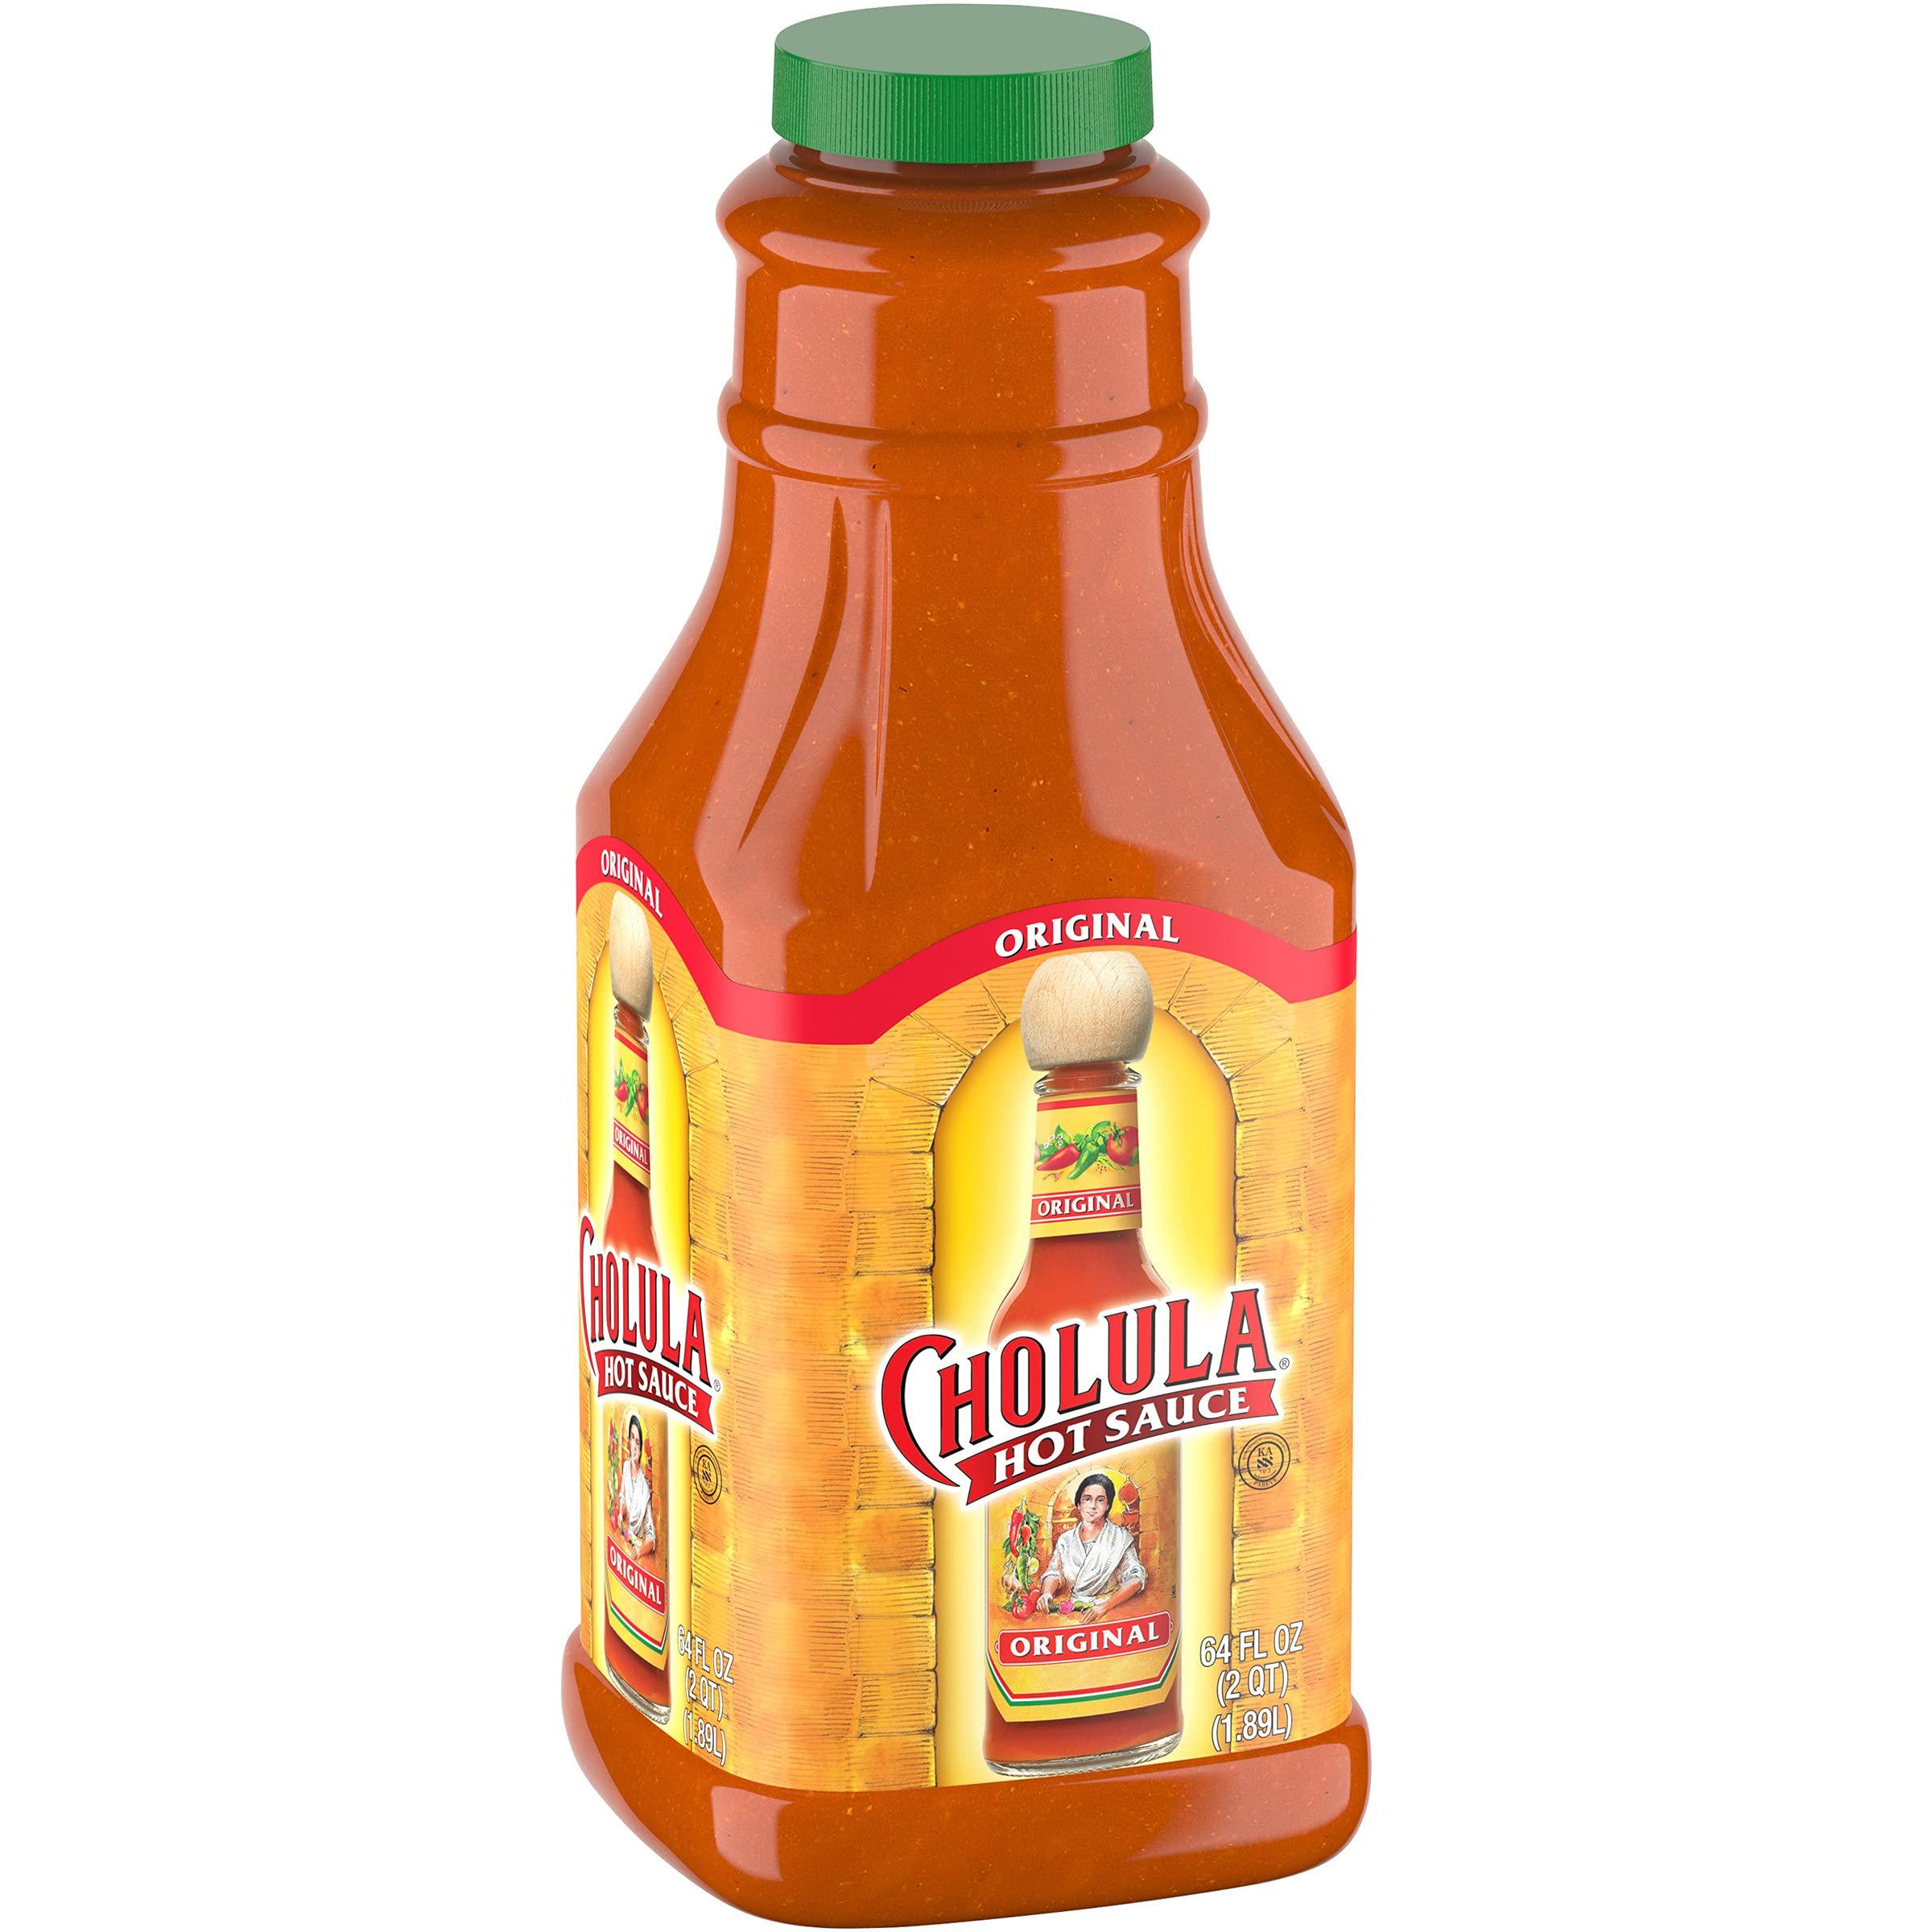 Cholula Original Hot Sauce Packets, 200 count - One 200 Count Individual  Hot Sauce Packets with Mexican Peppers and Signature Spice Blend, Perfect